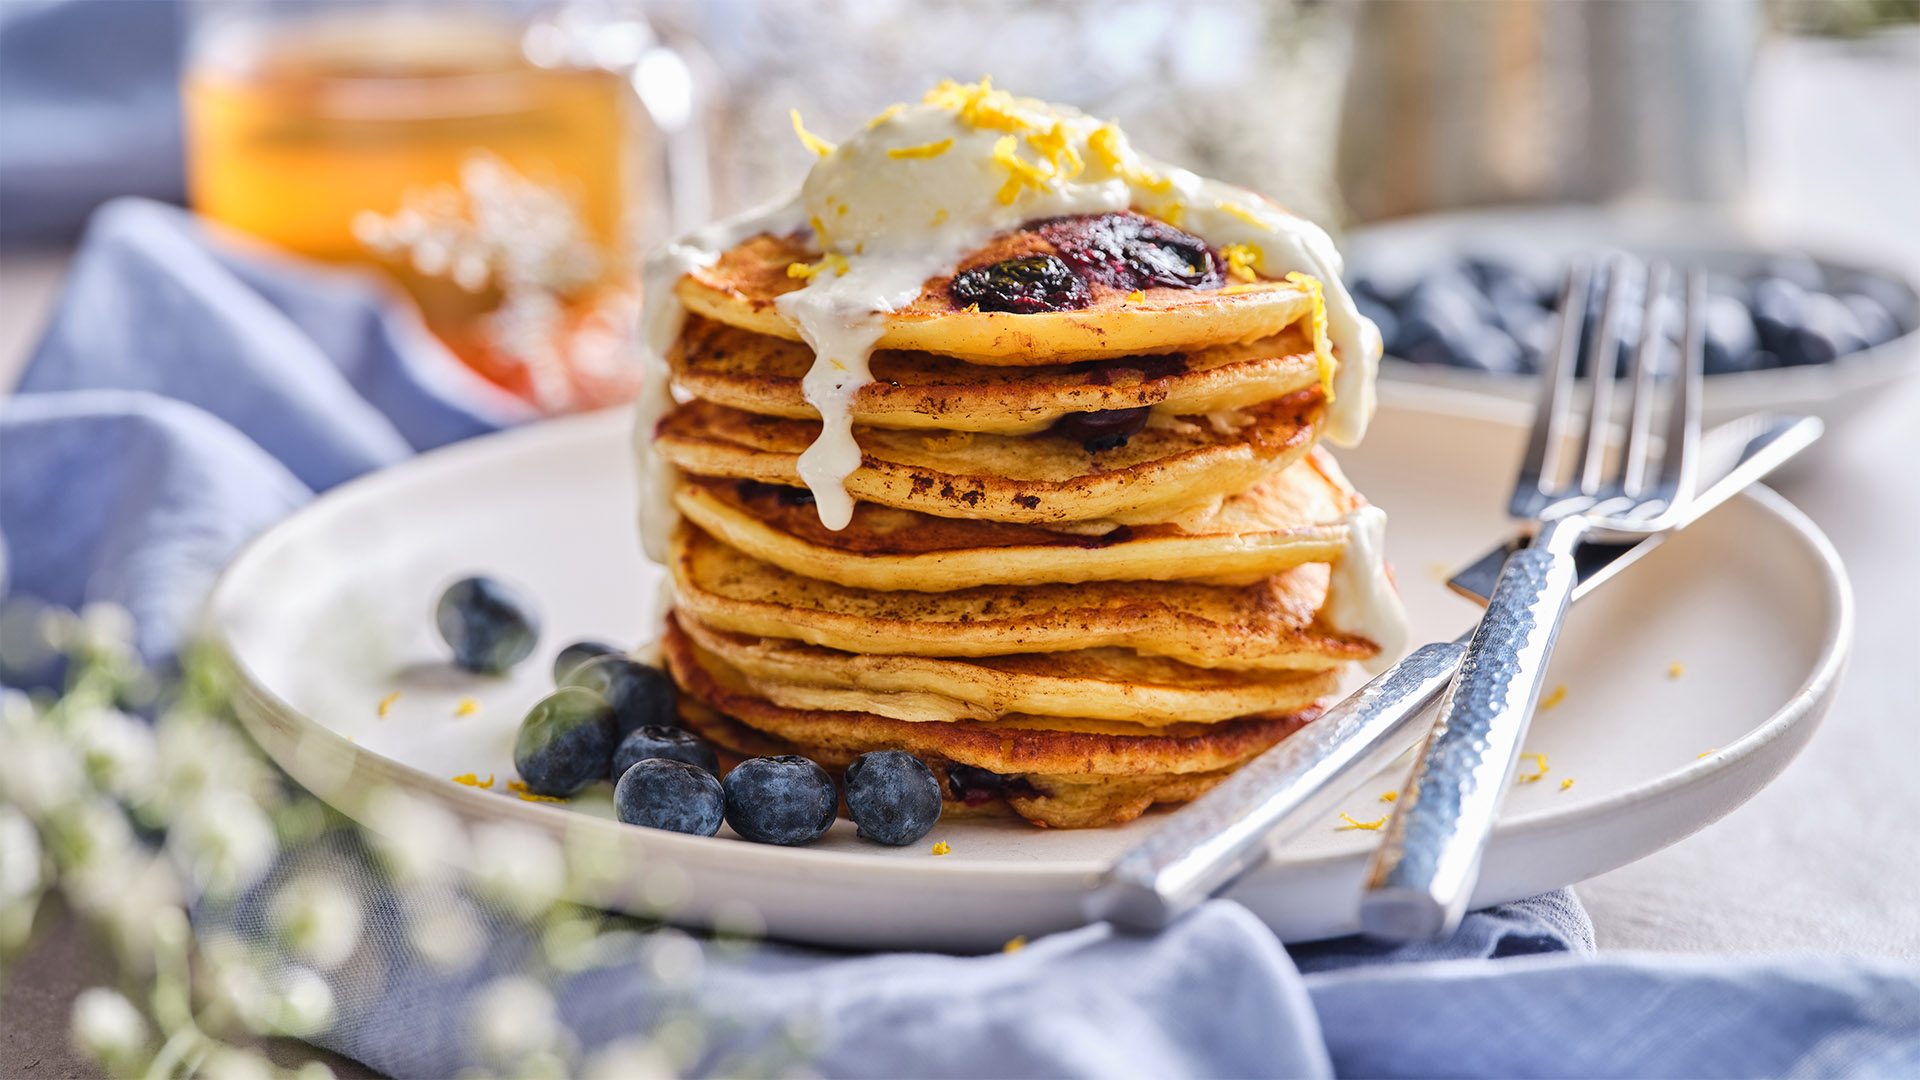 Stack of pancakes with ricotta and lemon blueberry drizzle on top on a white round plate next to a silver fork and knife.